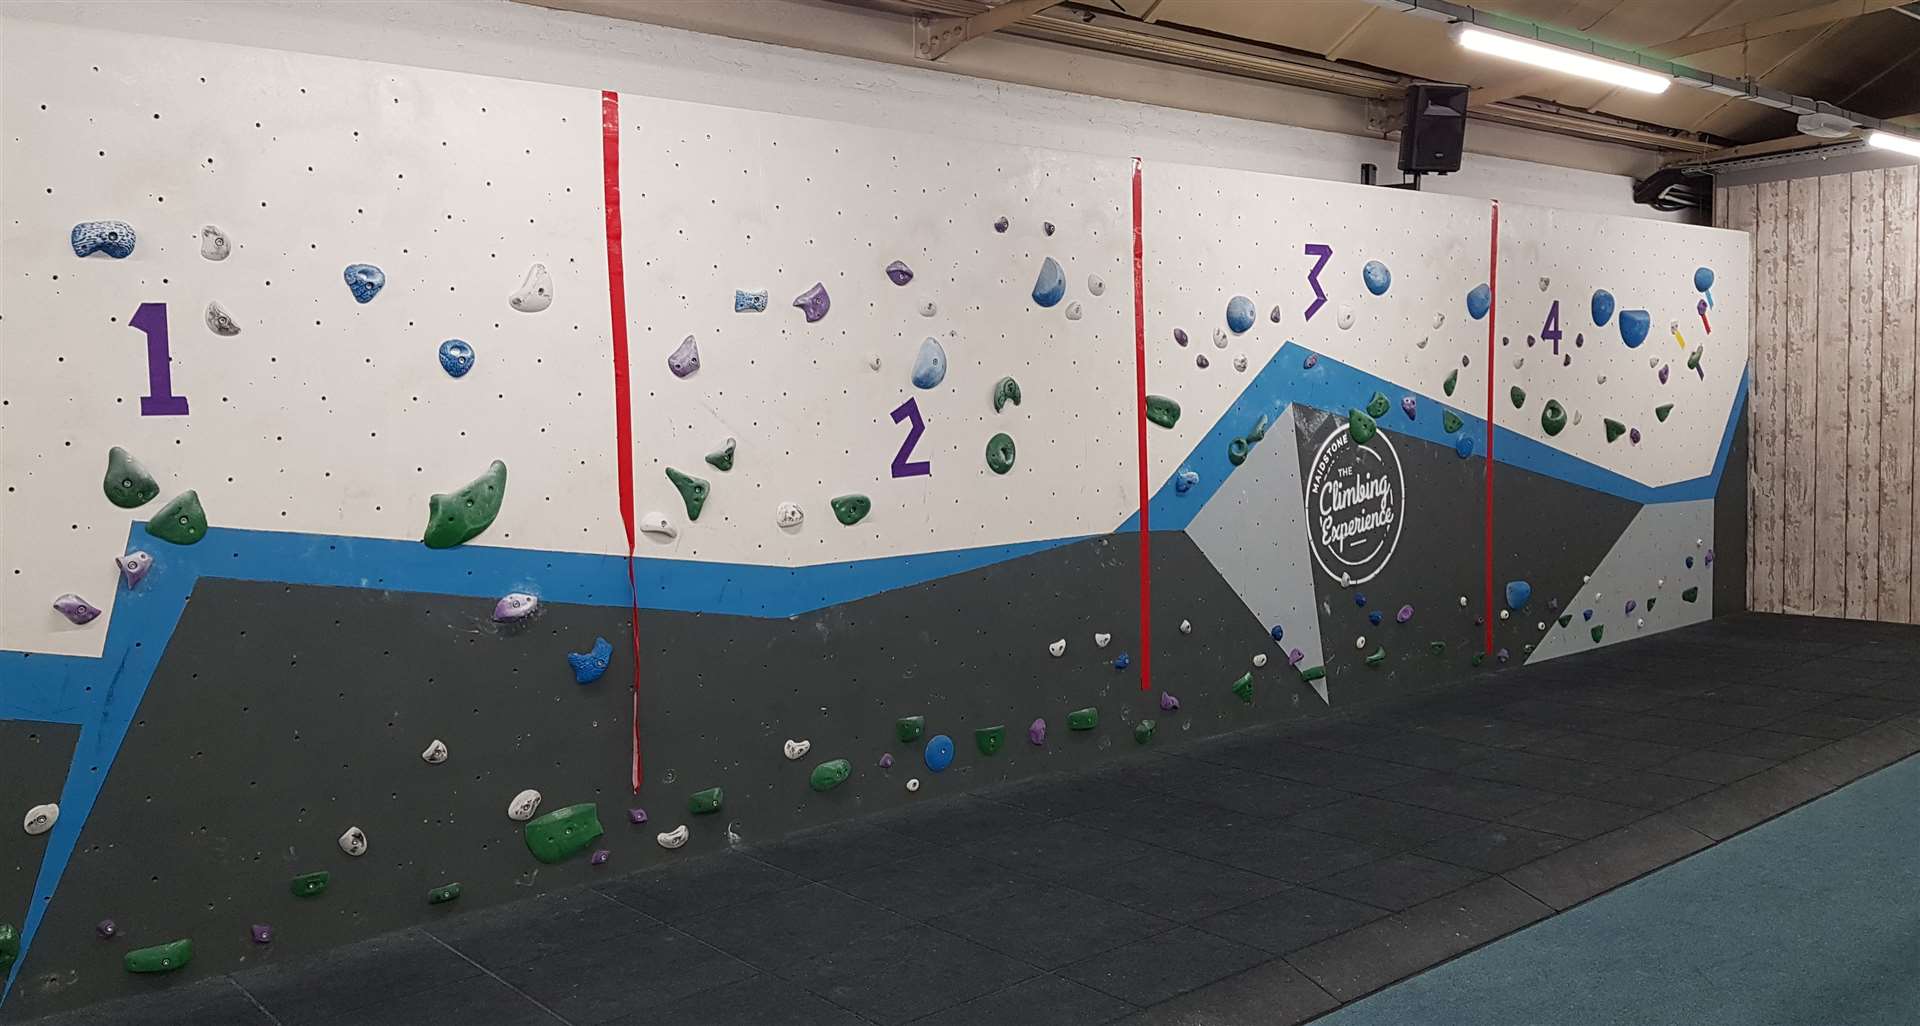 Training started on the traverse wall